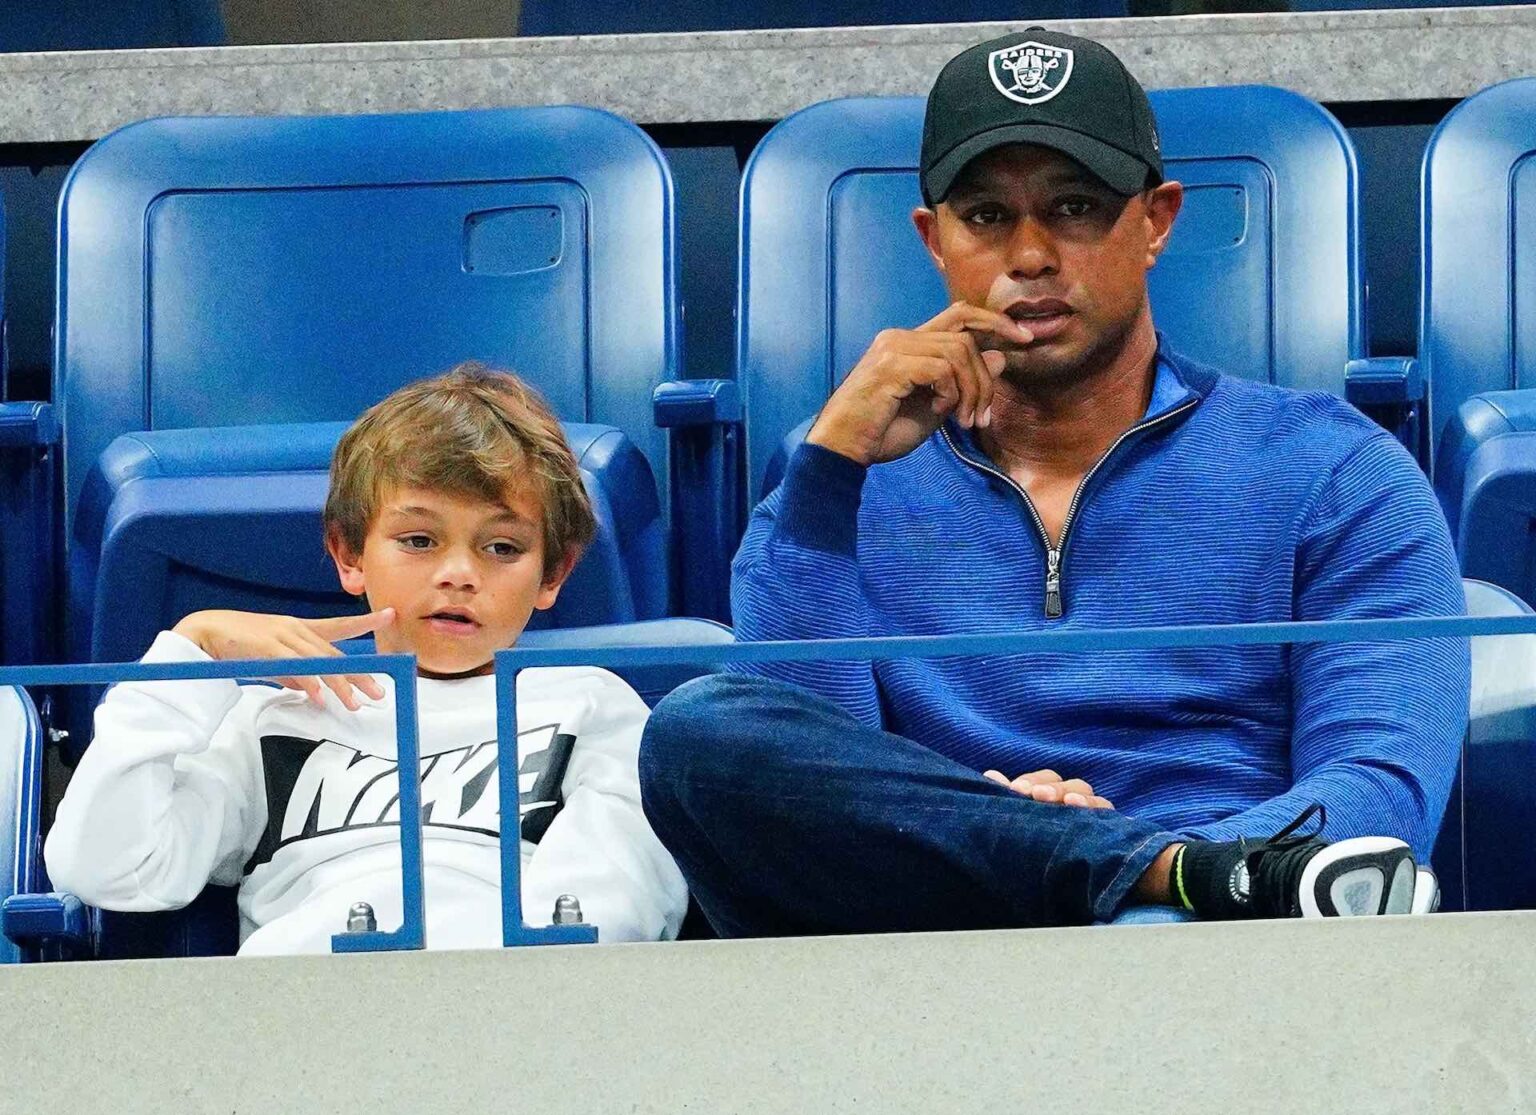 Tiger Woods may soon see his son following in his footsteps. The two are competing in a golf tournament together.